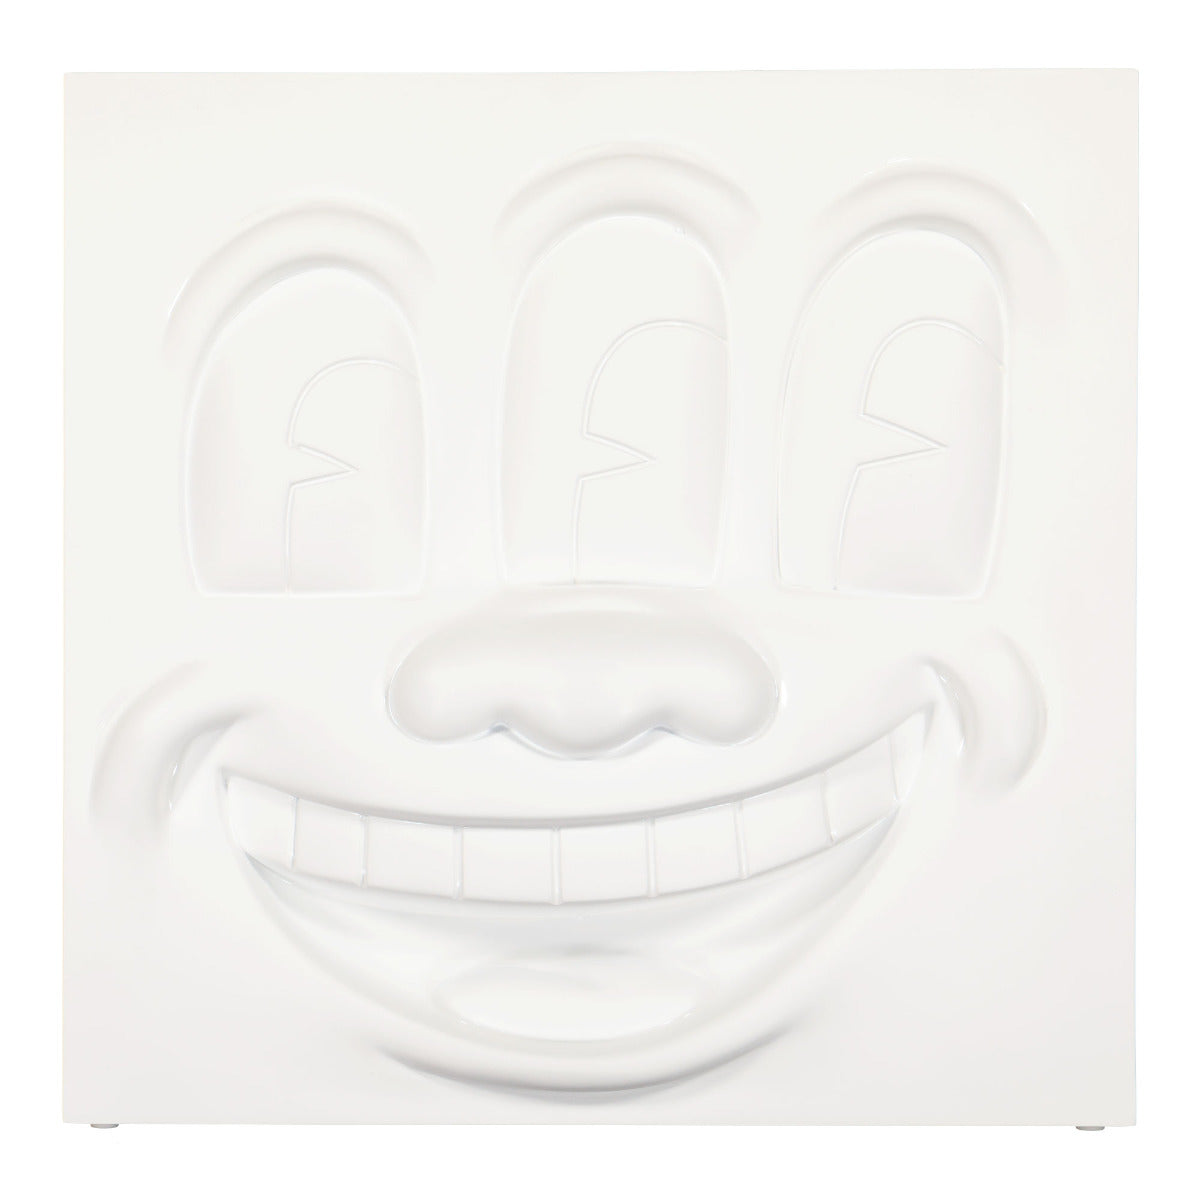 Keith Haring Three Eyed Smiling Face Statue